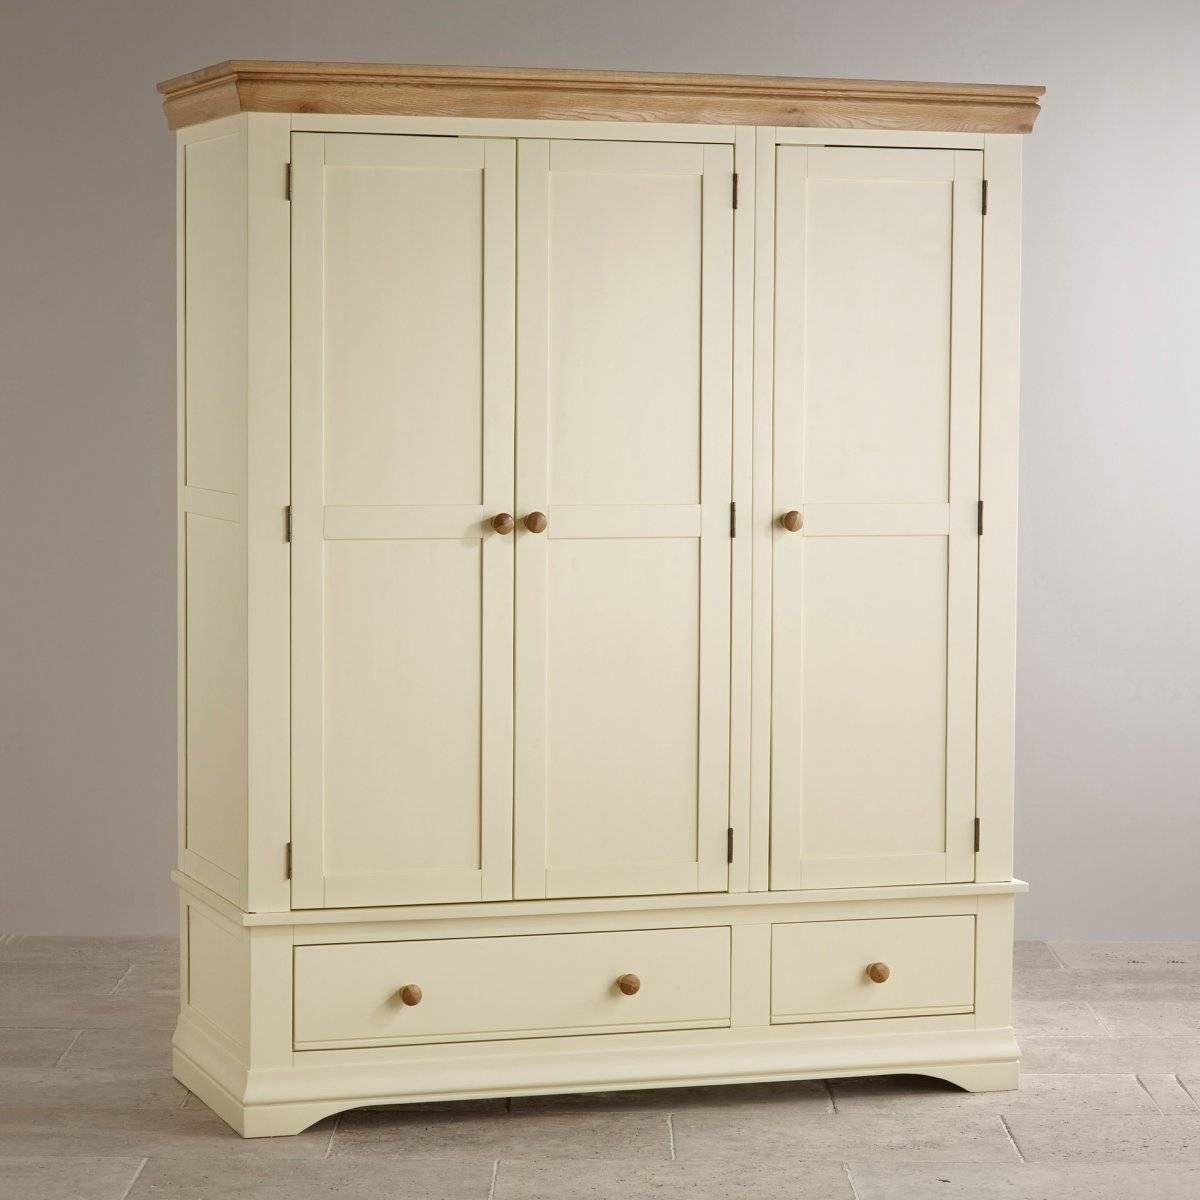 Country Cottage Natural Oak Triple Wardrobe – Cream Painted Pertaining To Painted Triple Wardrobes (View 8 of 15)